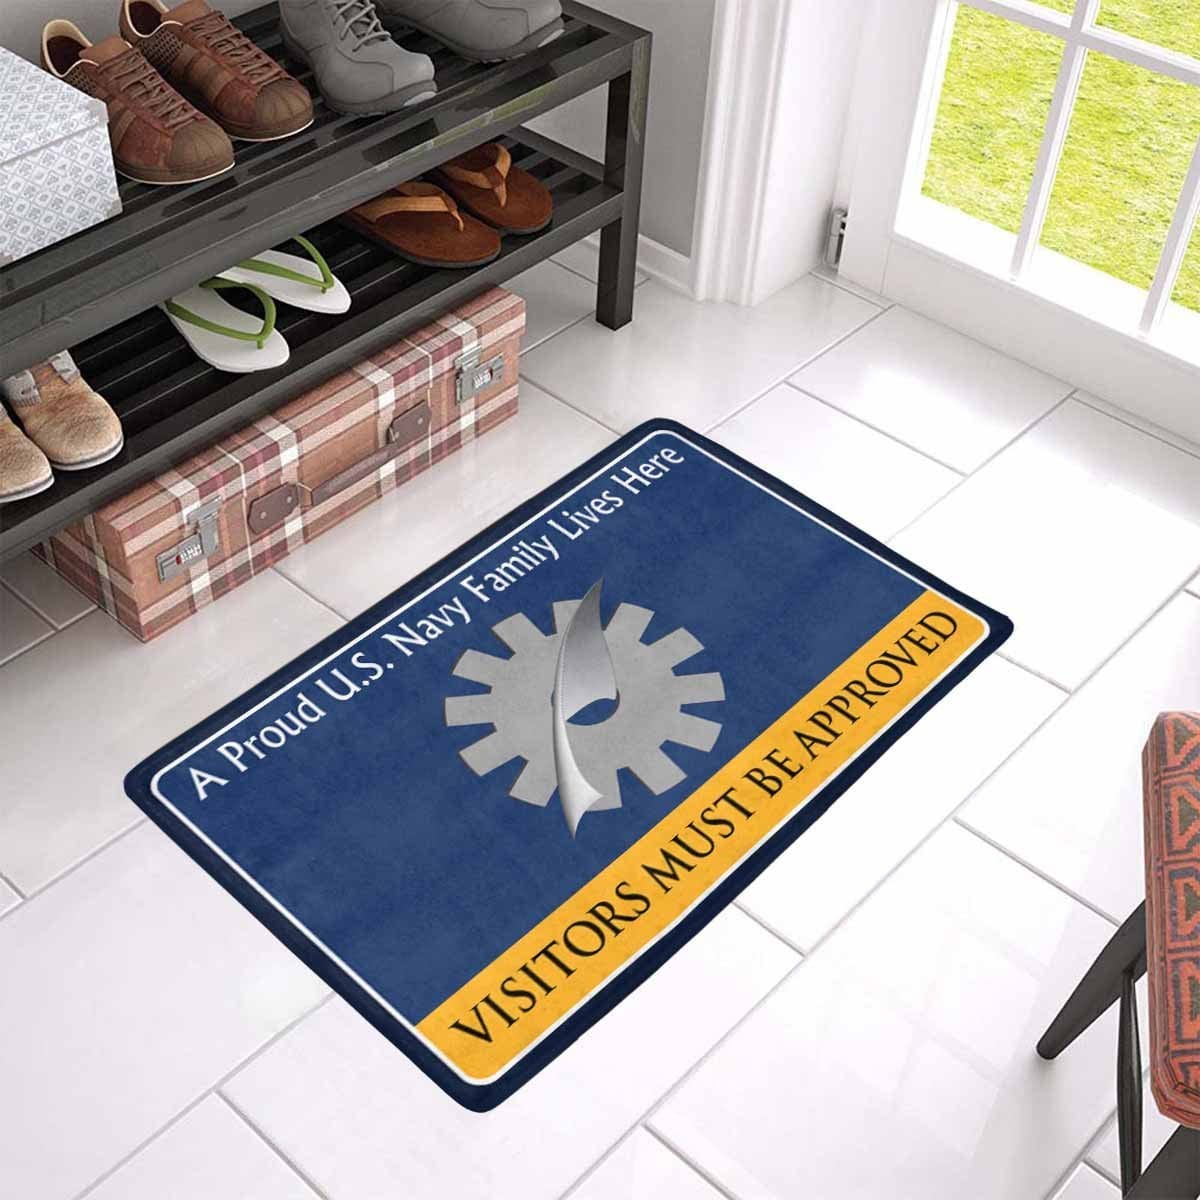 Navy Data Processing Technician Navy DP Family Doormat - Visitors must be approved (23,6 inches x 15,7 inches)-Doormat-Navy-Rate-Veterans Nation